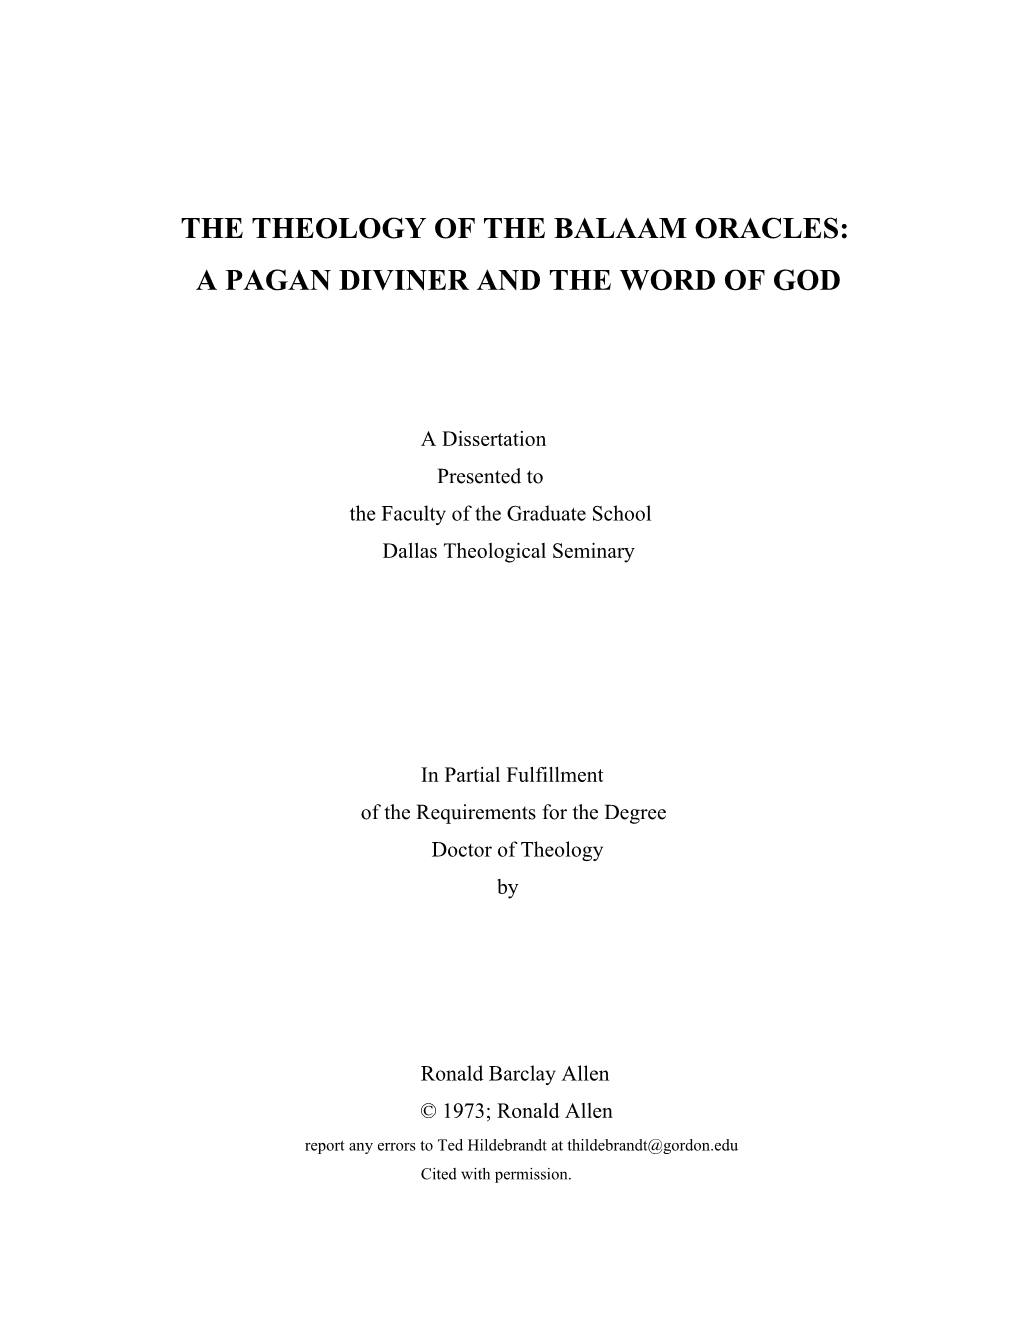 The Theology of the Balaam Oracles